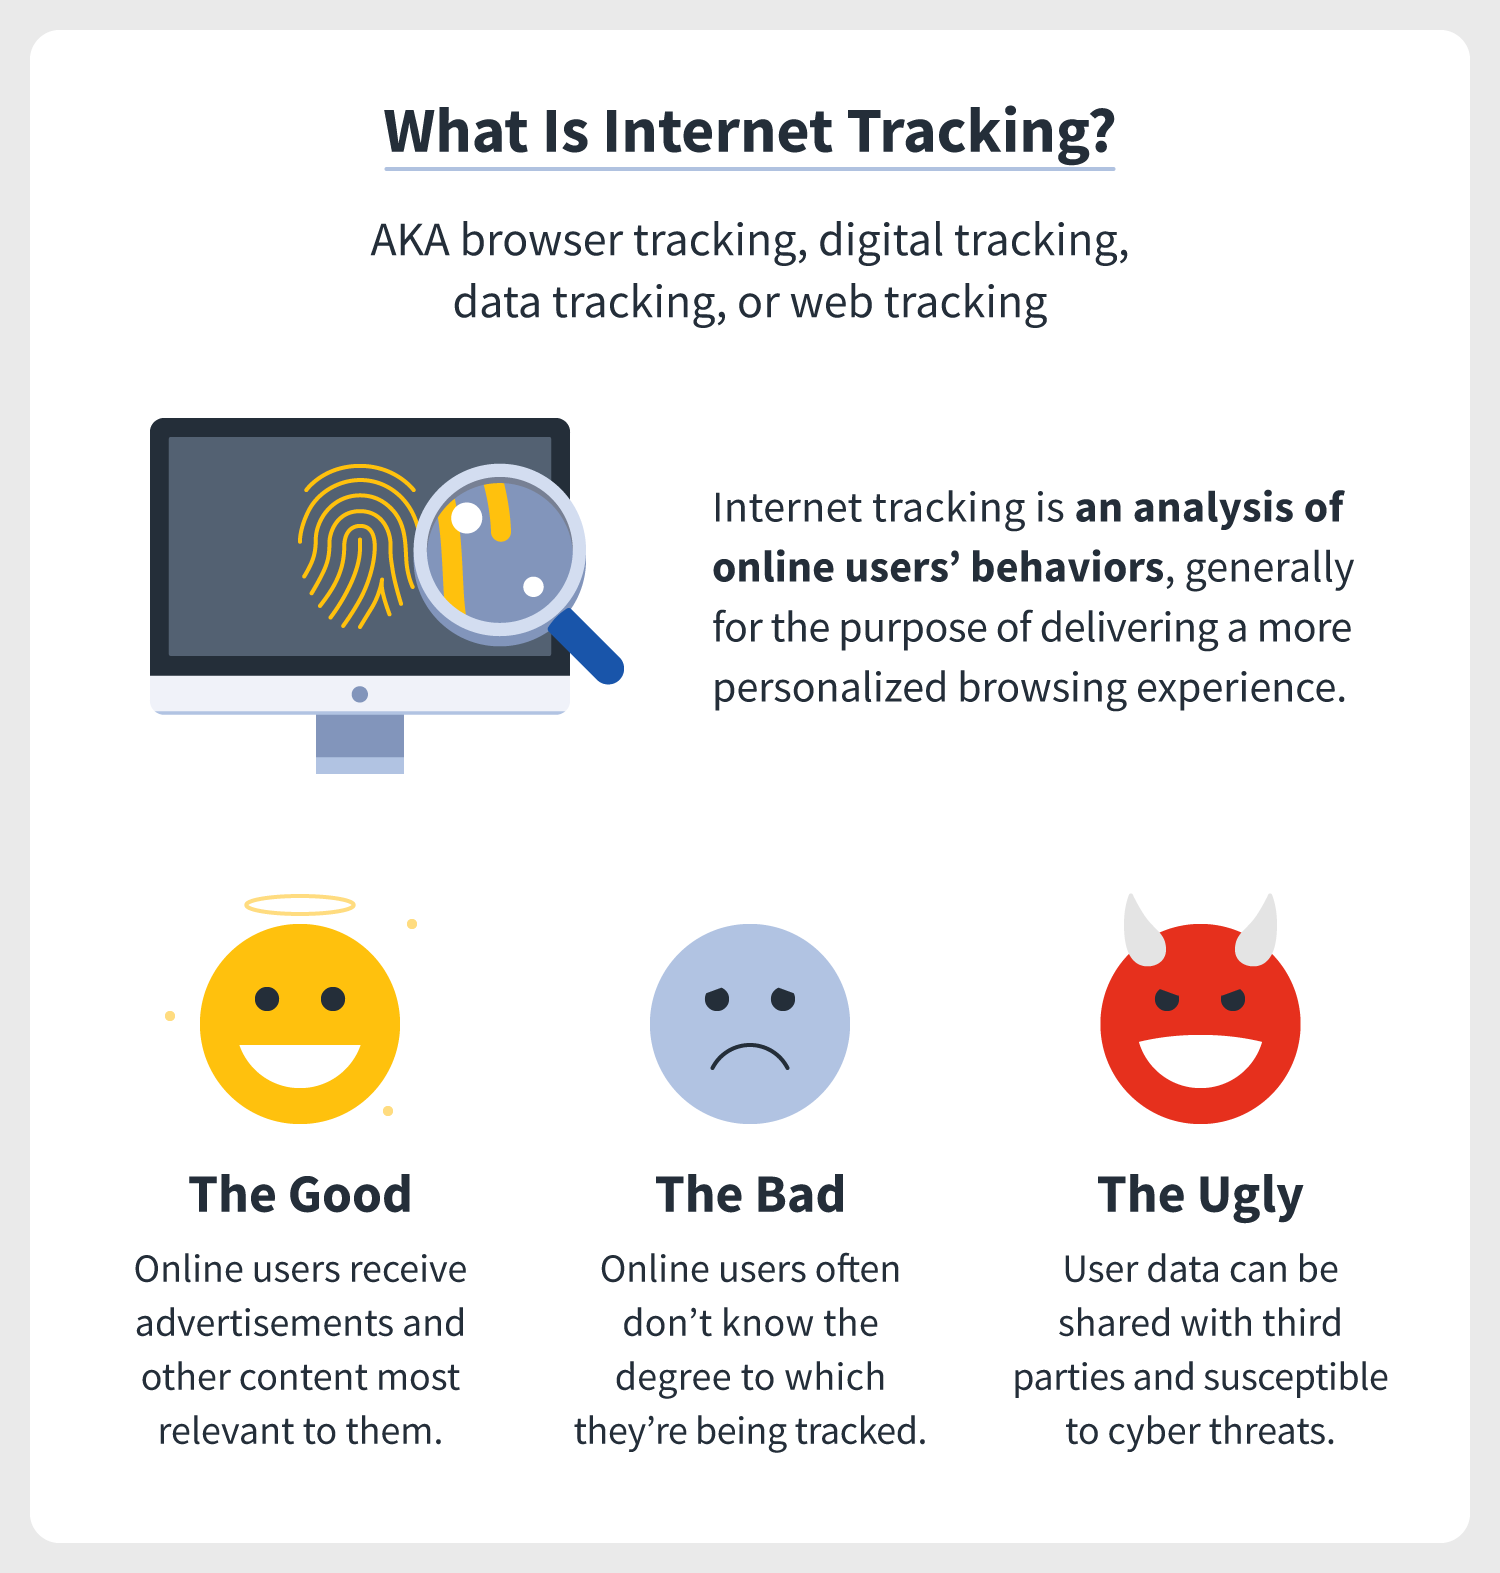 a definition of internet tracking, which is the analysis of online users’ behaviors